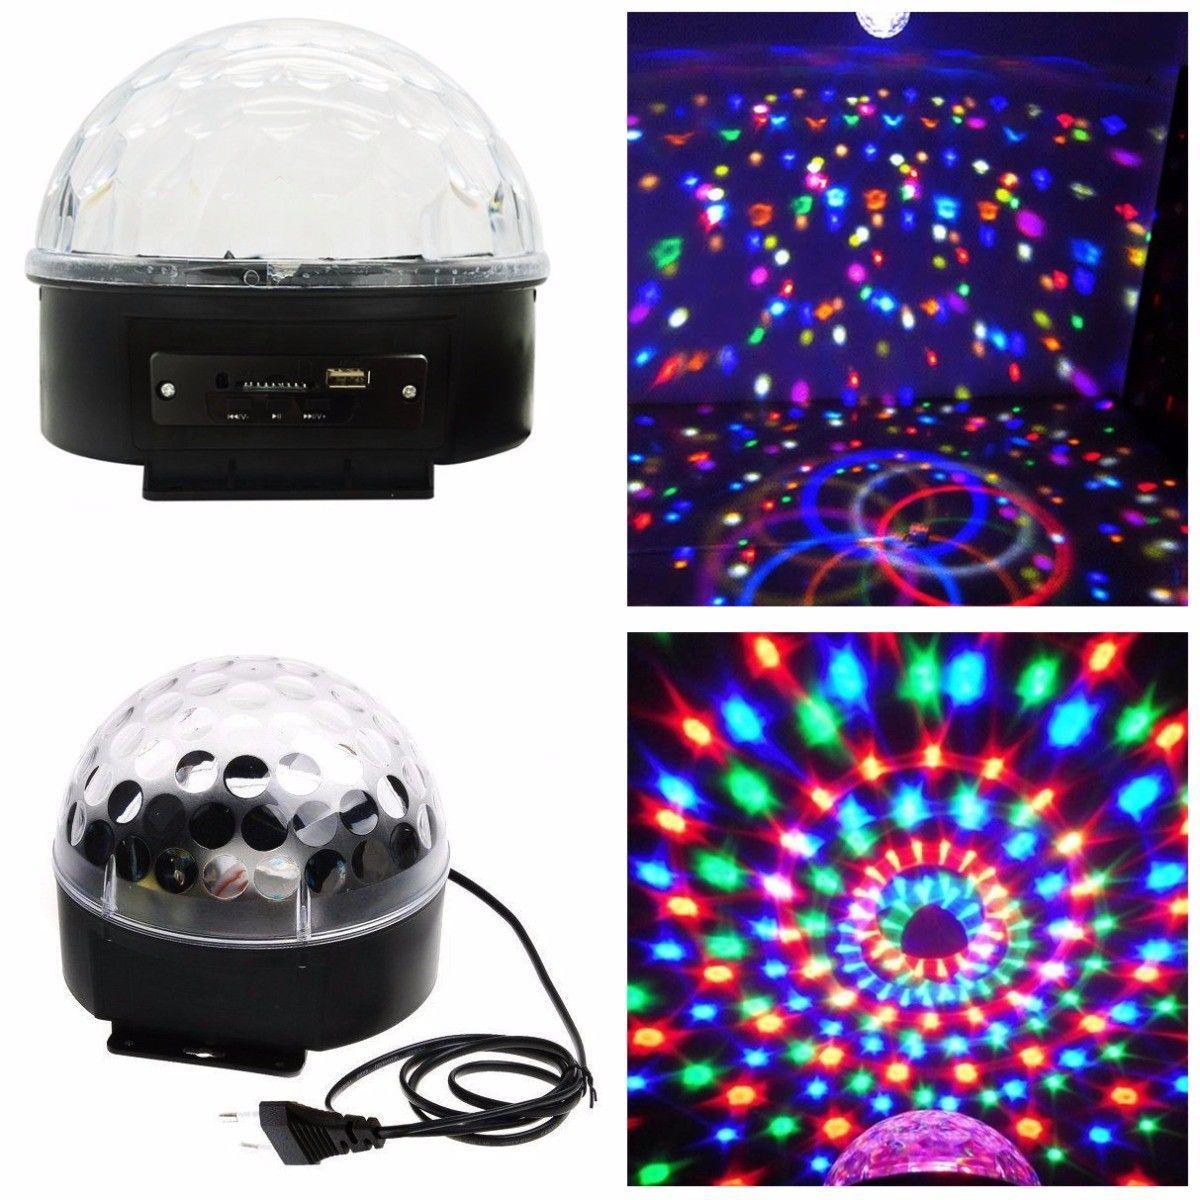 x6 Channel Projected LED Crystal Light Magic Ball Ideal, Christmas, Party, Home   4863 (Parcel Rate)